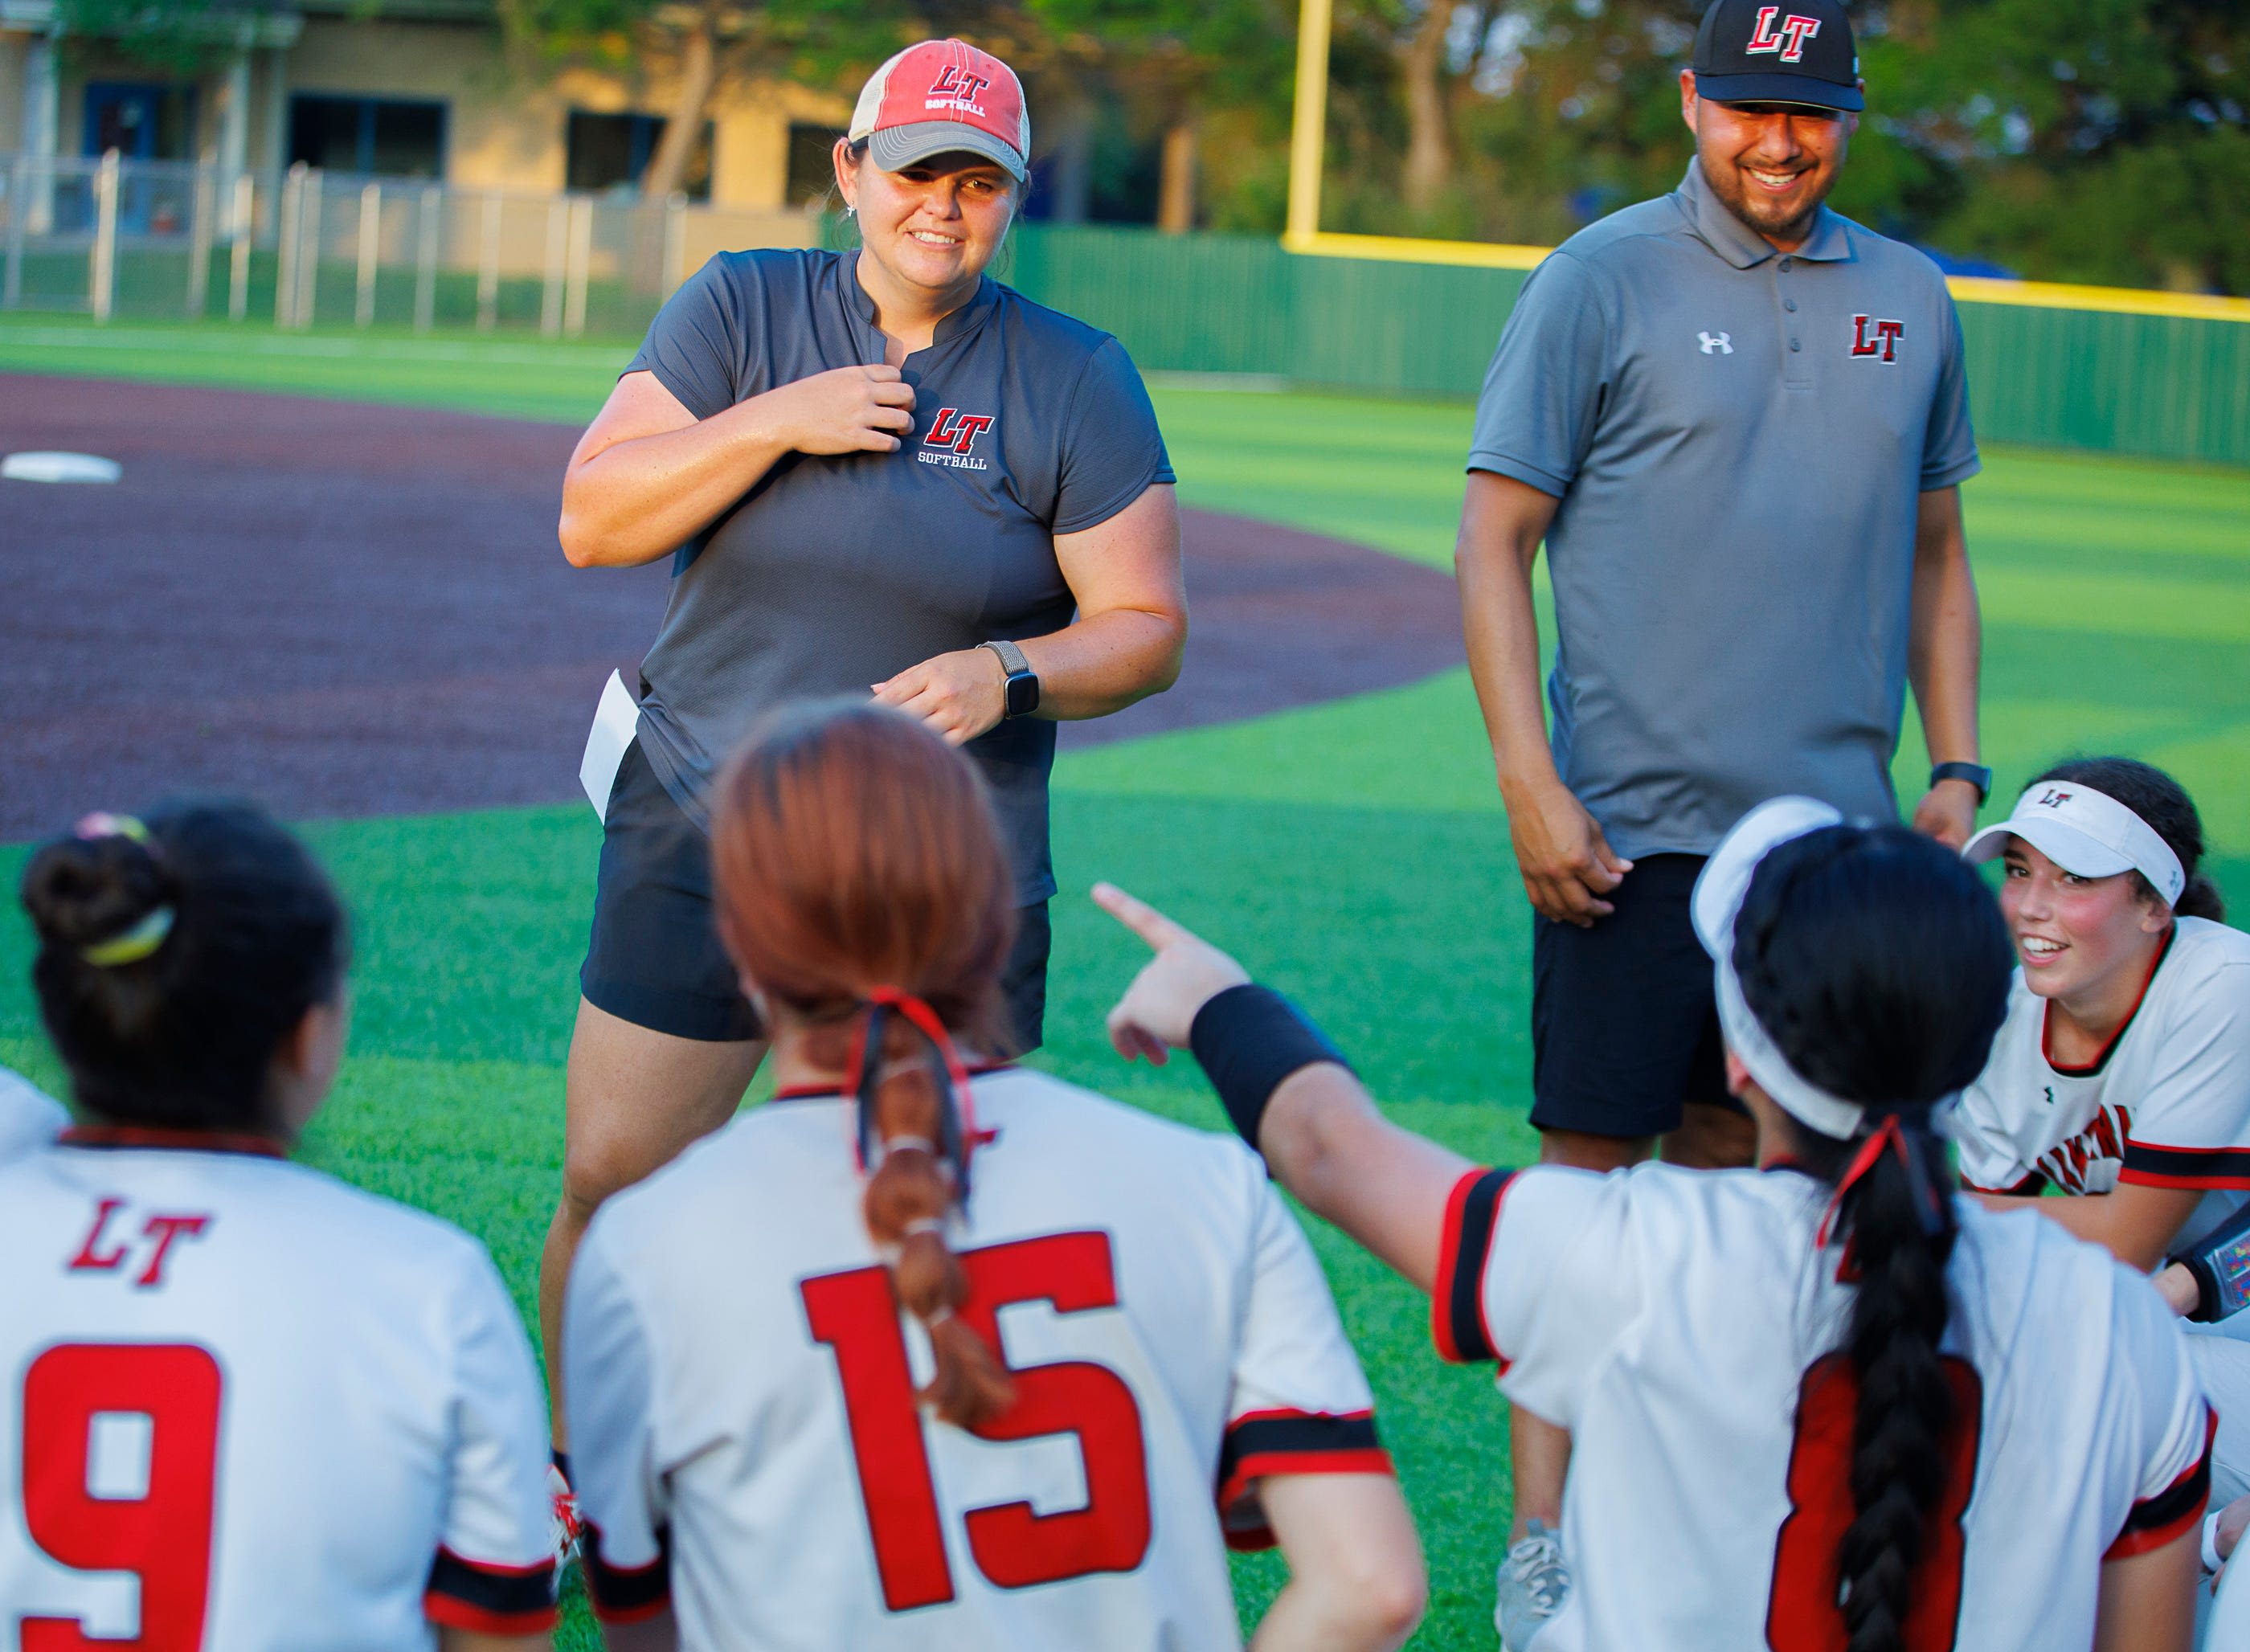 Lake Travis freshman leads Cavaliers past district rival Bowie in 1-game softball playoff